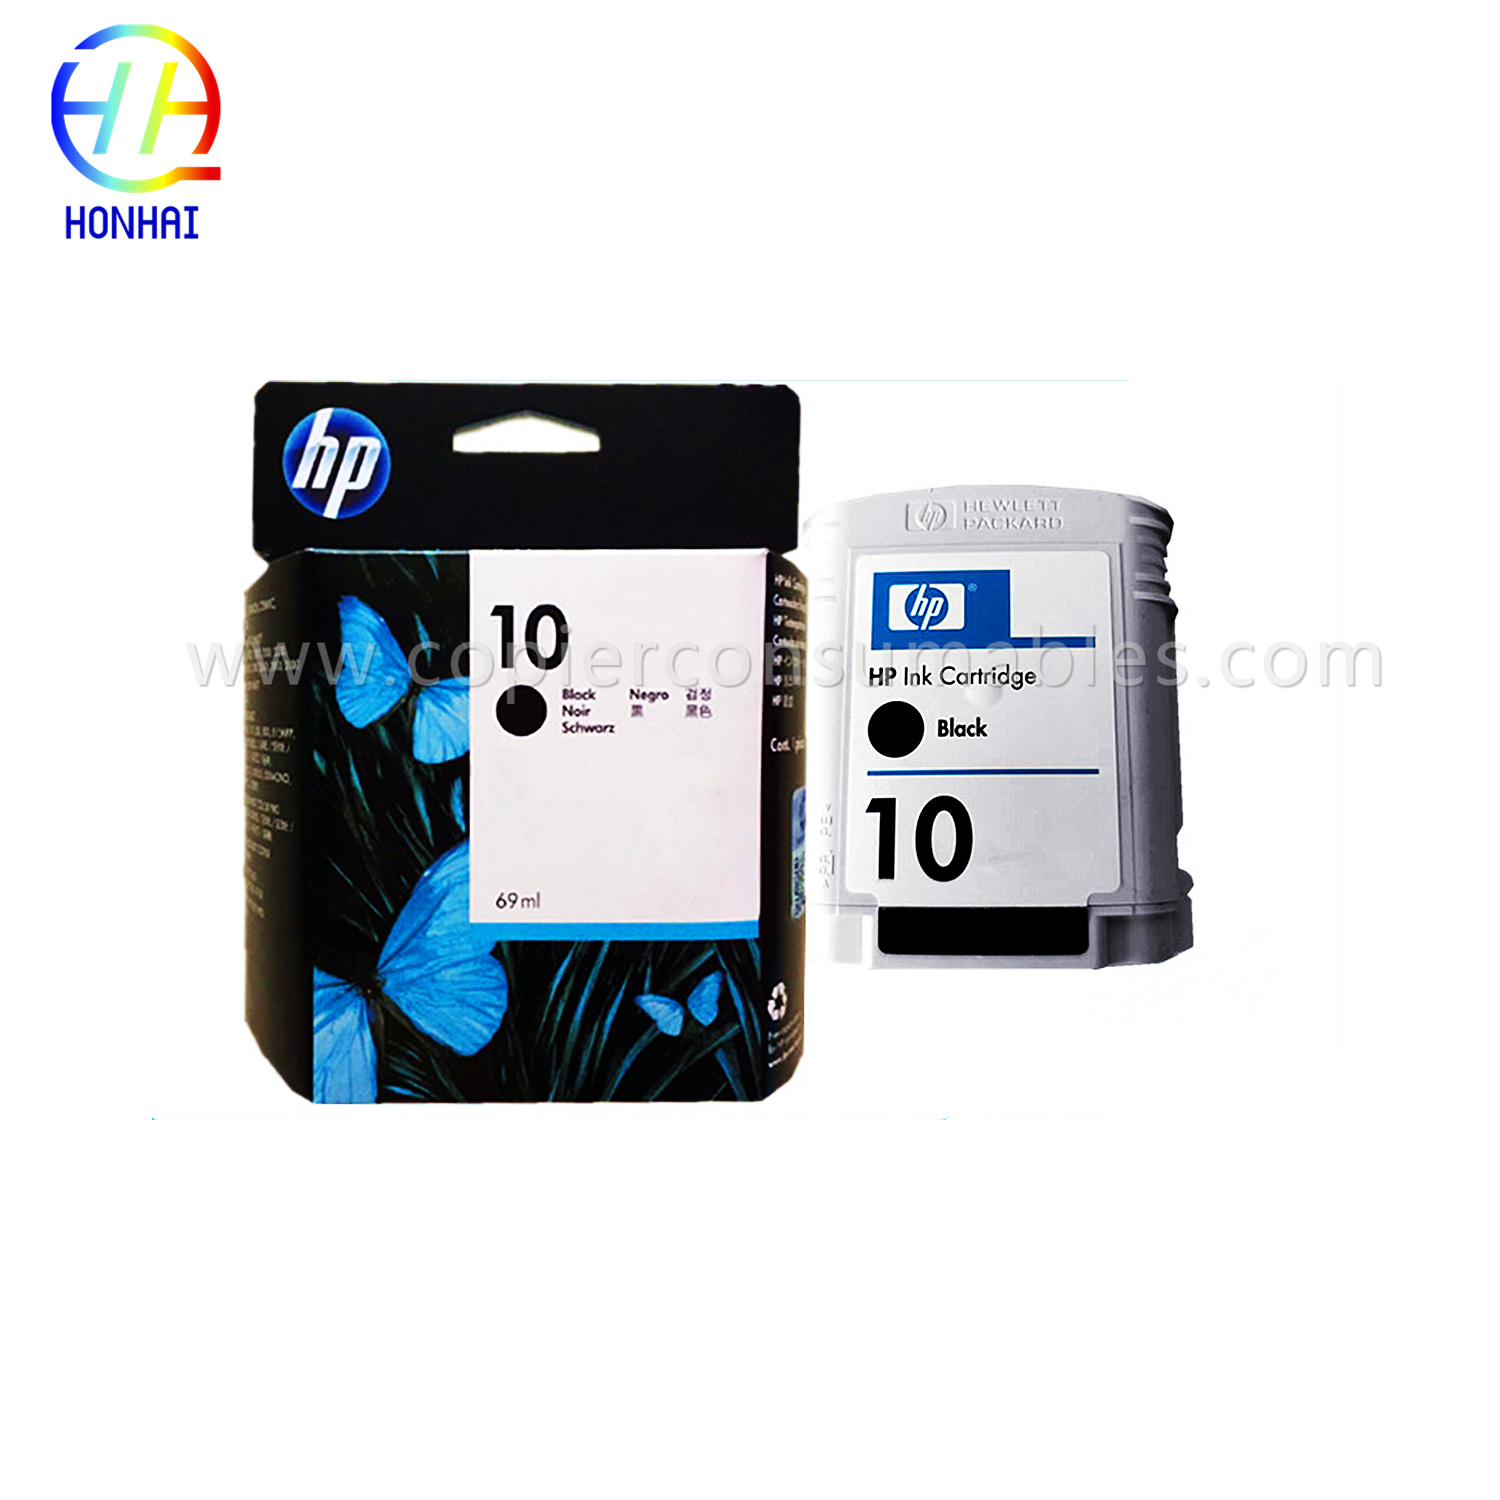 HP 800 500 815 820 9110 9120 9130 (C4844A 10) OEM 用インク カートリッジ